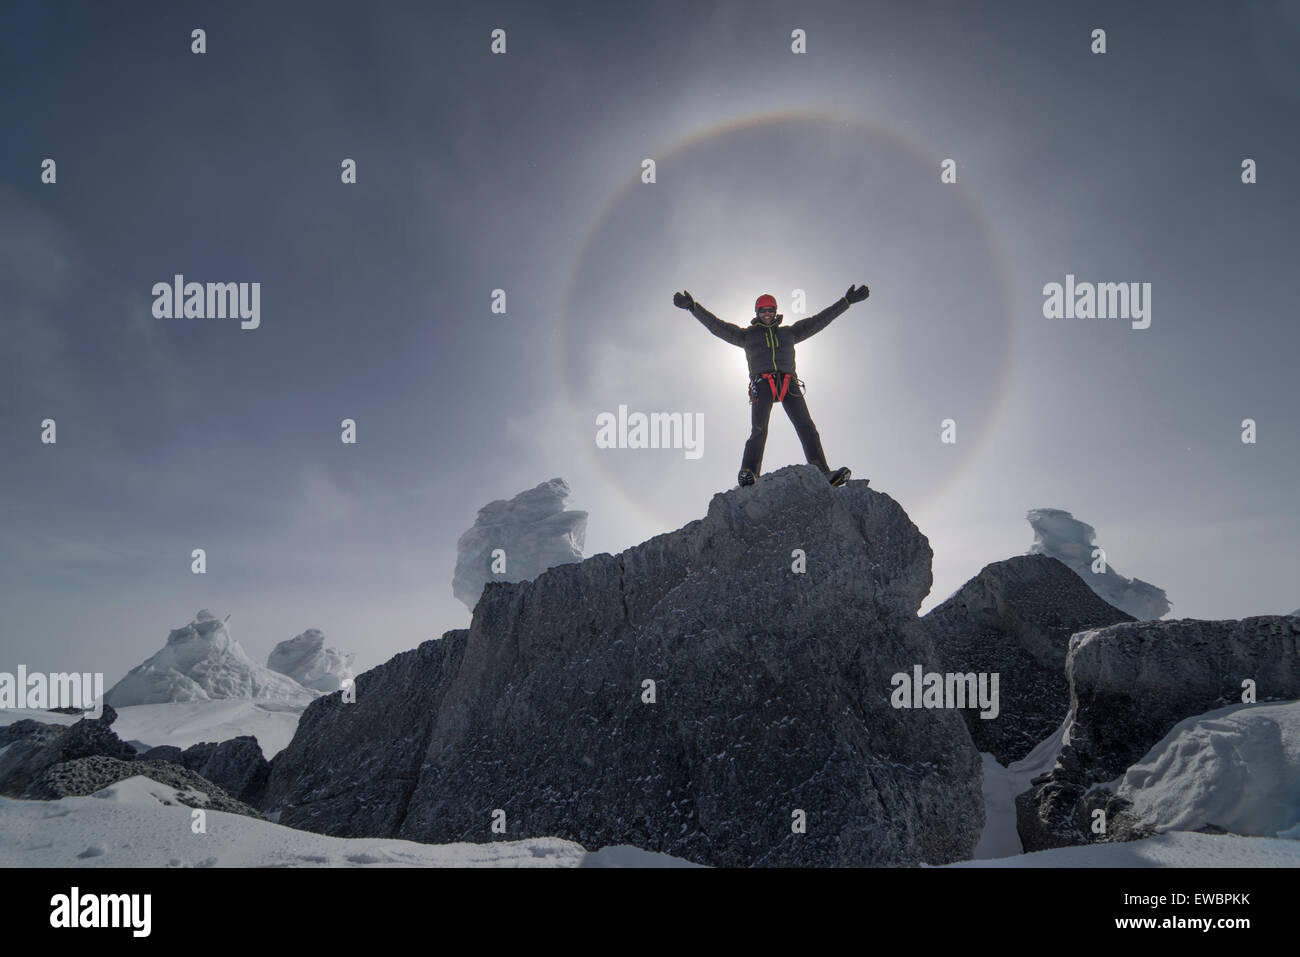 A man stands infront of the sun as it produces a large halo from ice crystals in the sky. Stock Photo